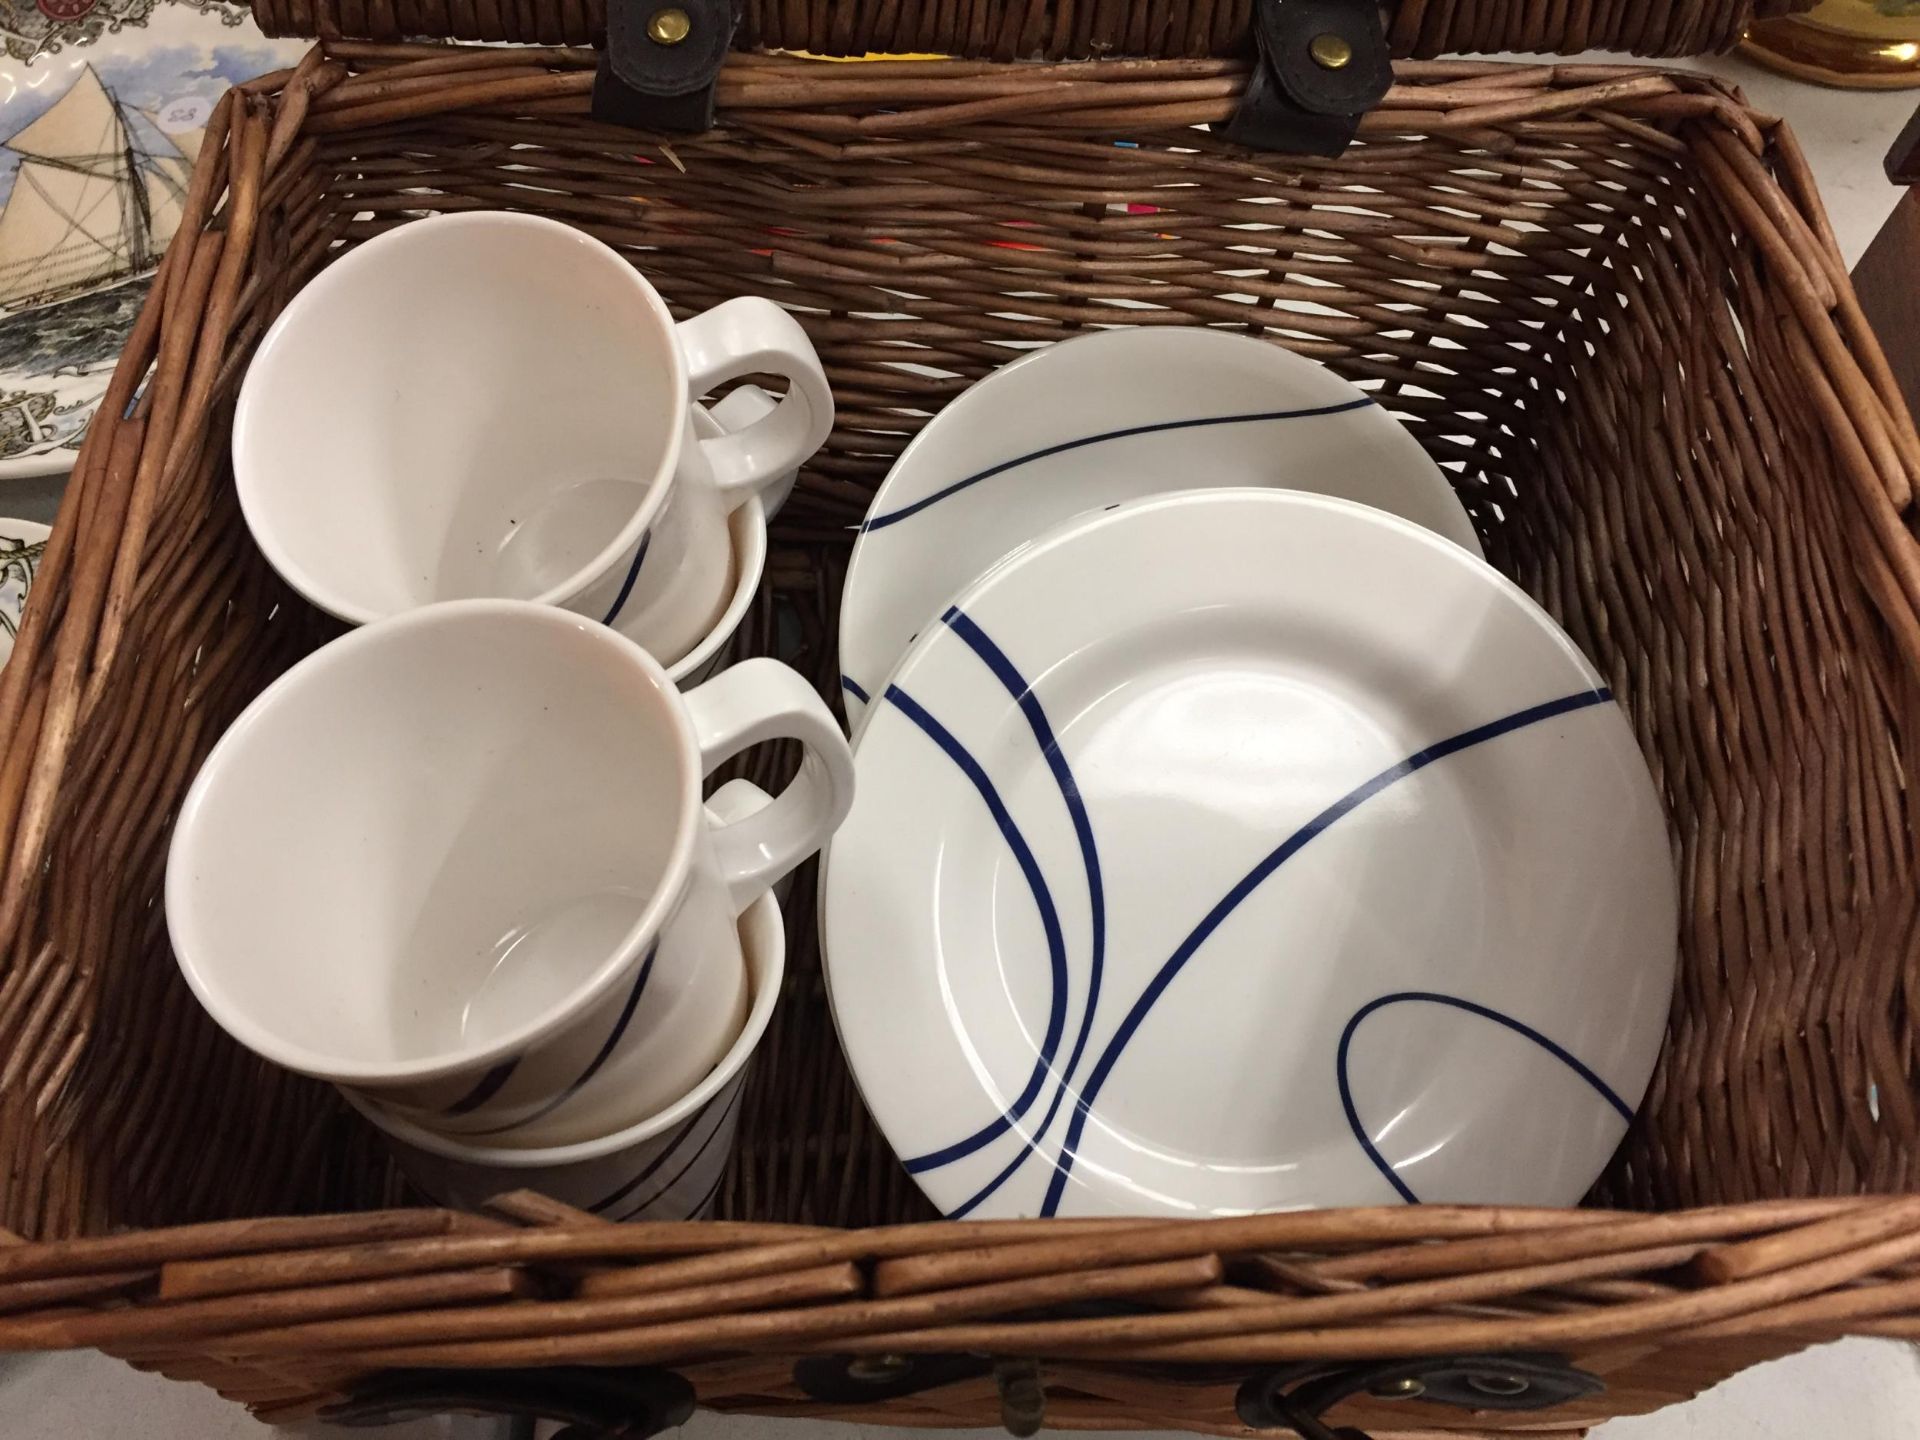 A WICKER PICNIC BASKET WITH PLATES, BOWLS AND CUPS - Image 3 of 3